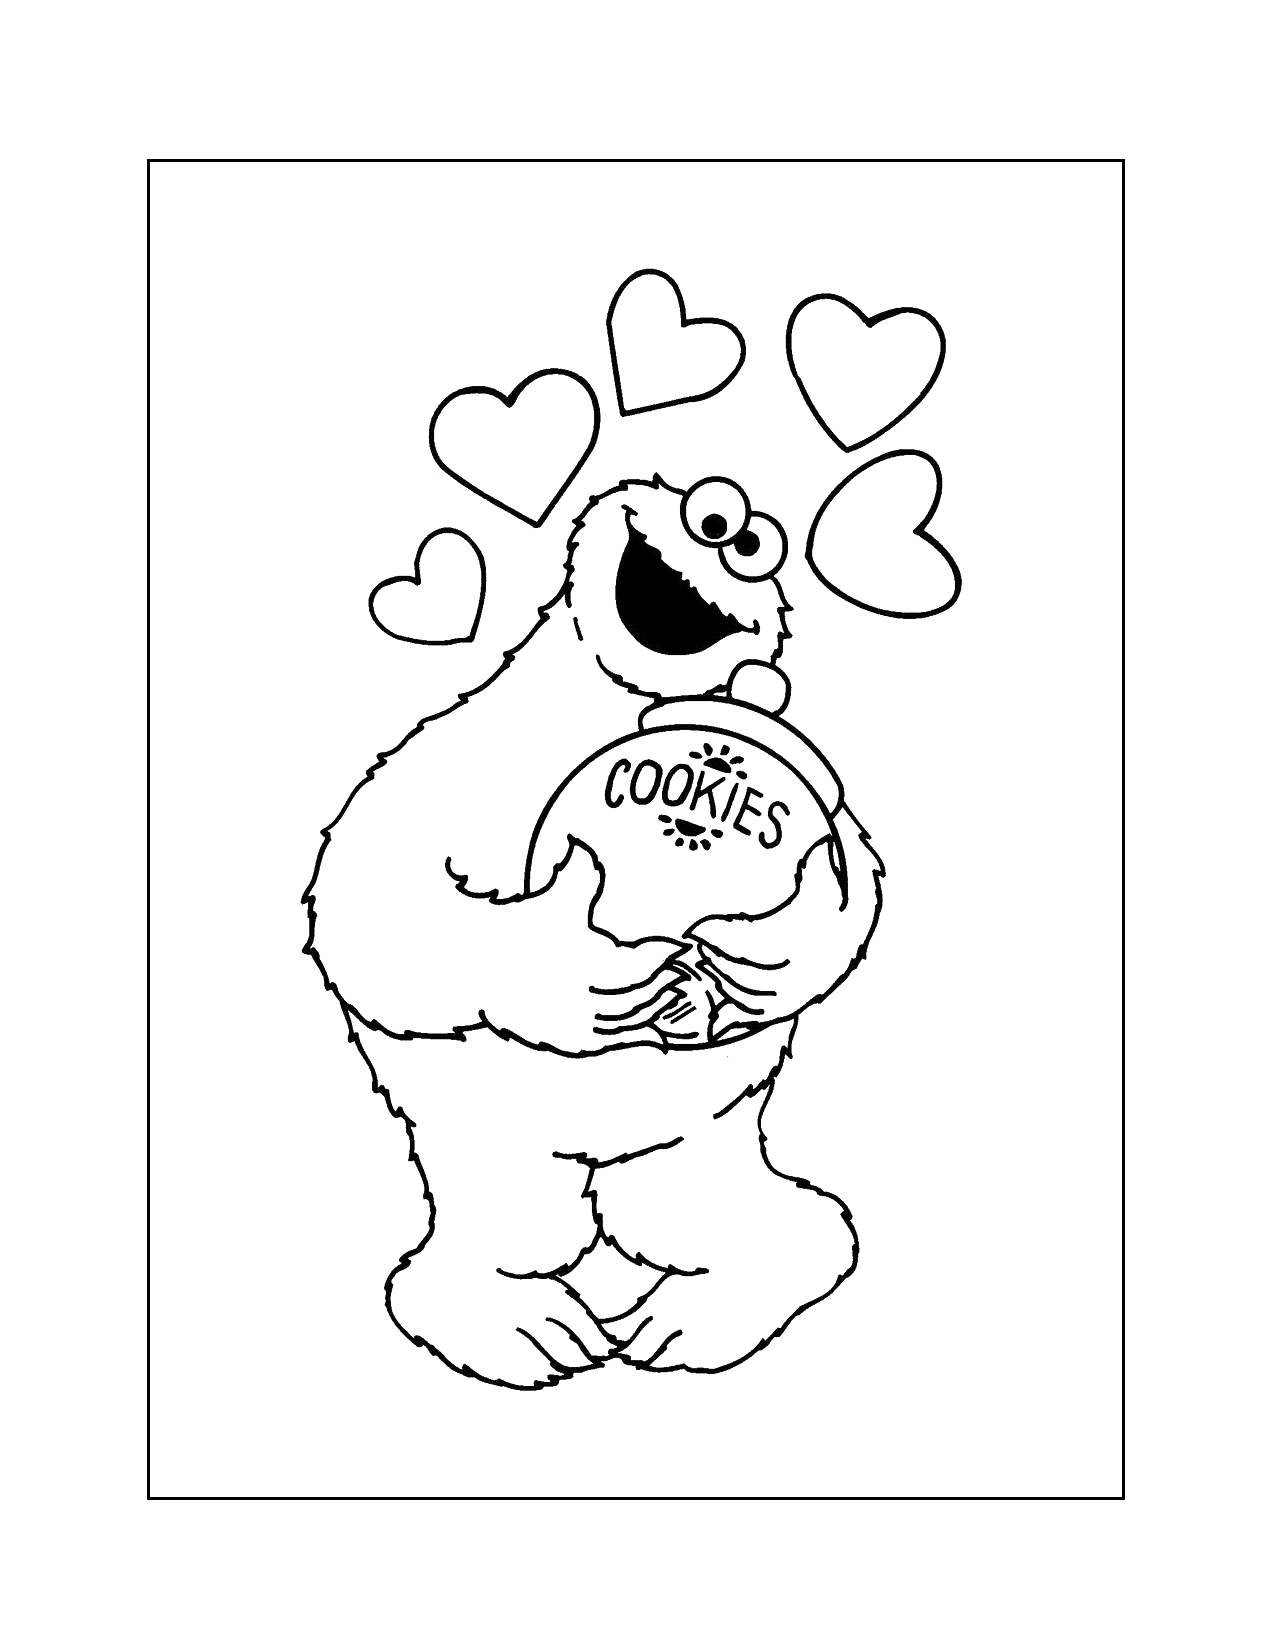 Cookie Monster Loves Cookies Coloring Page